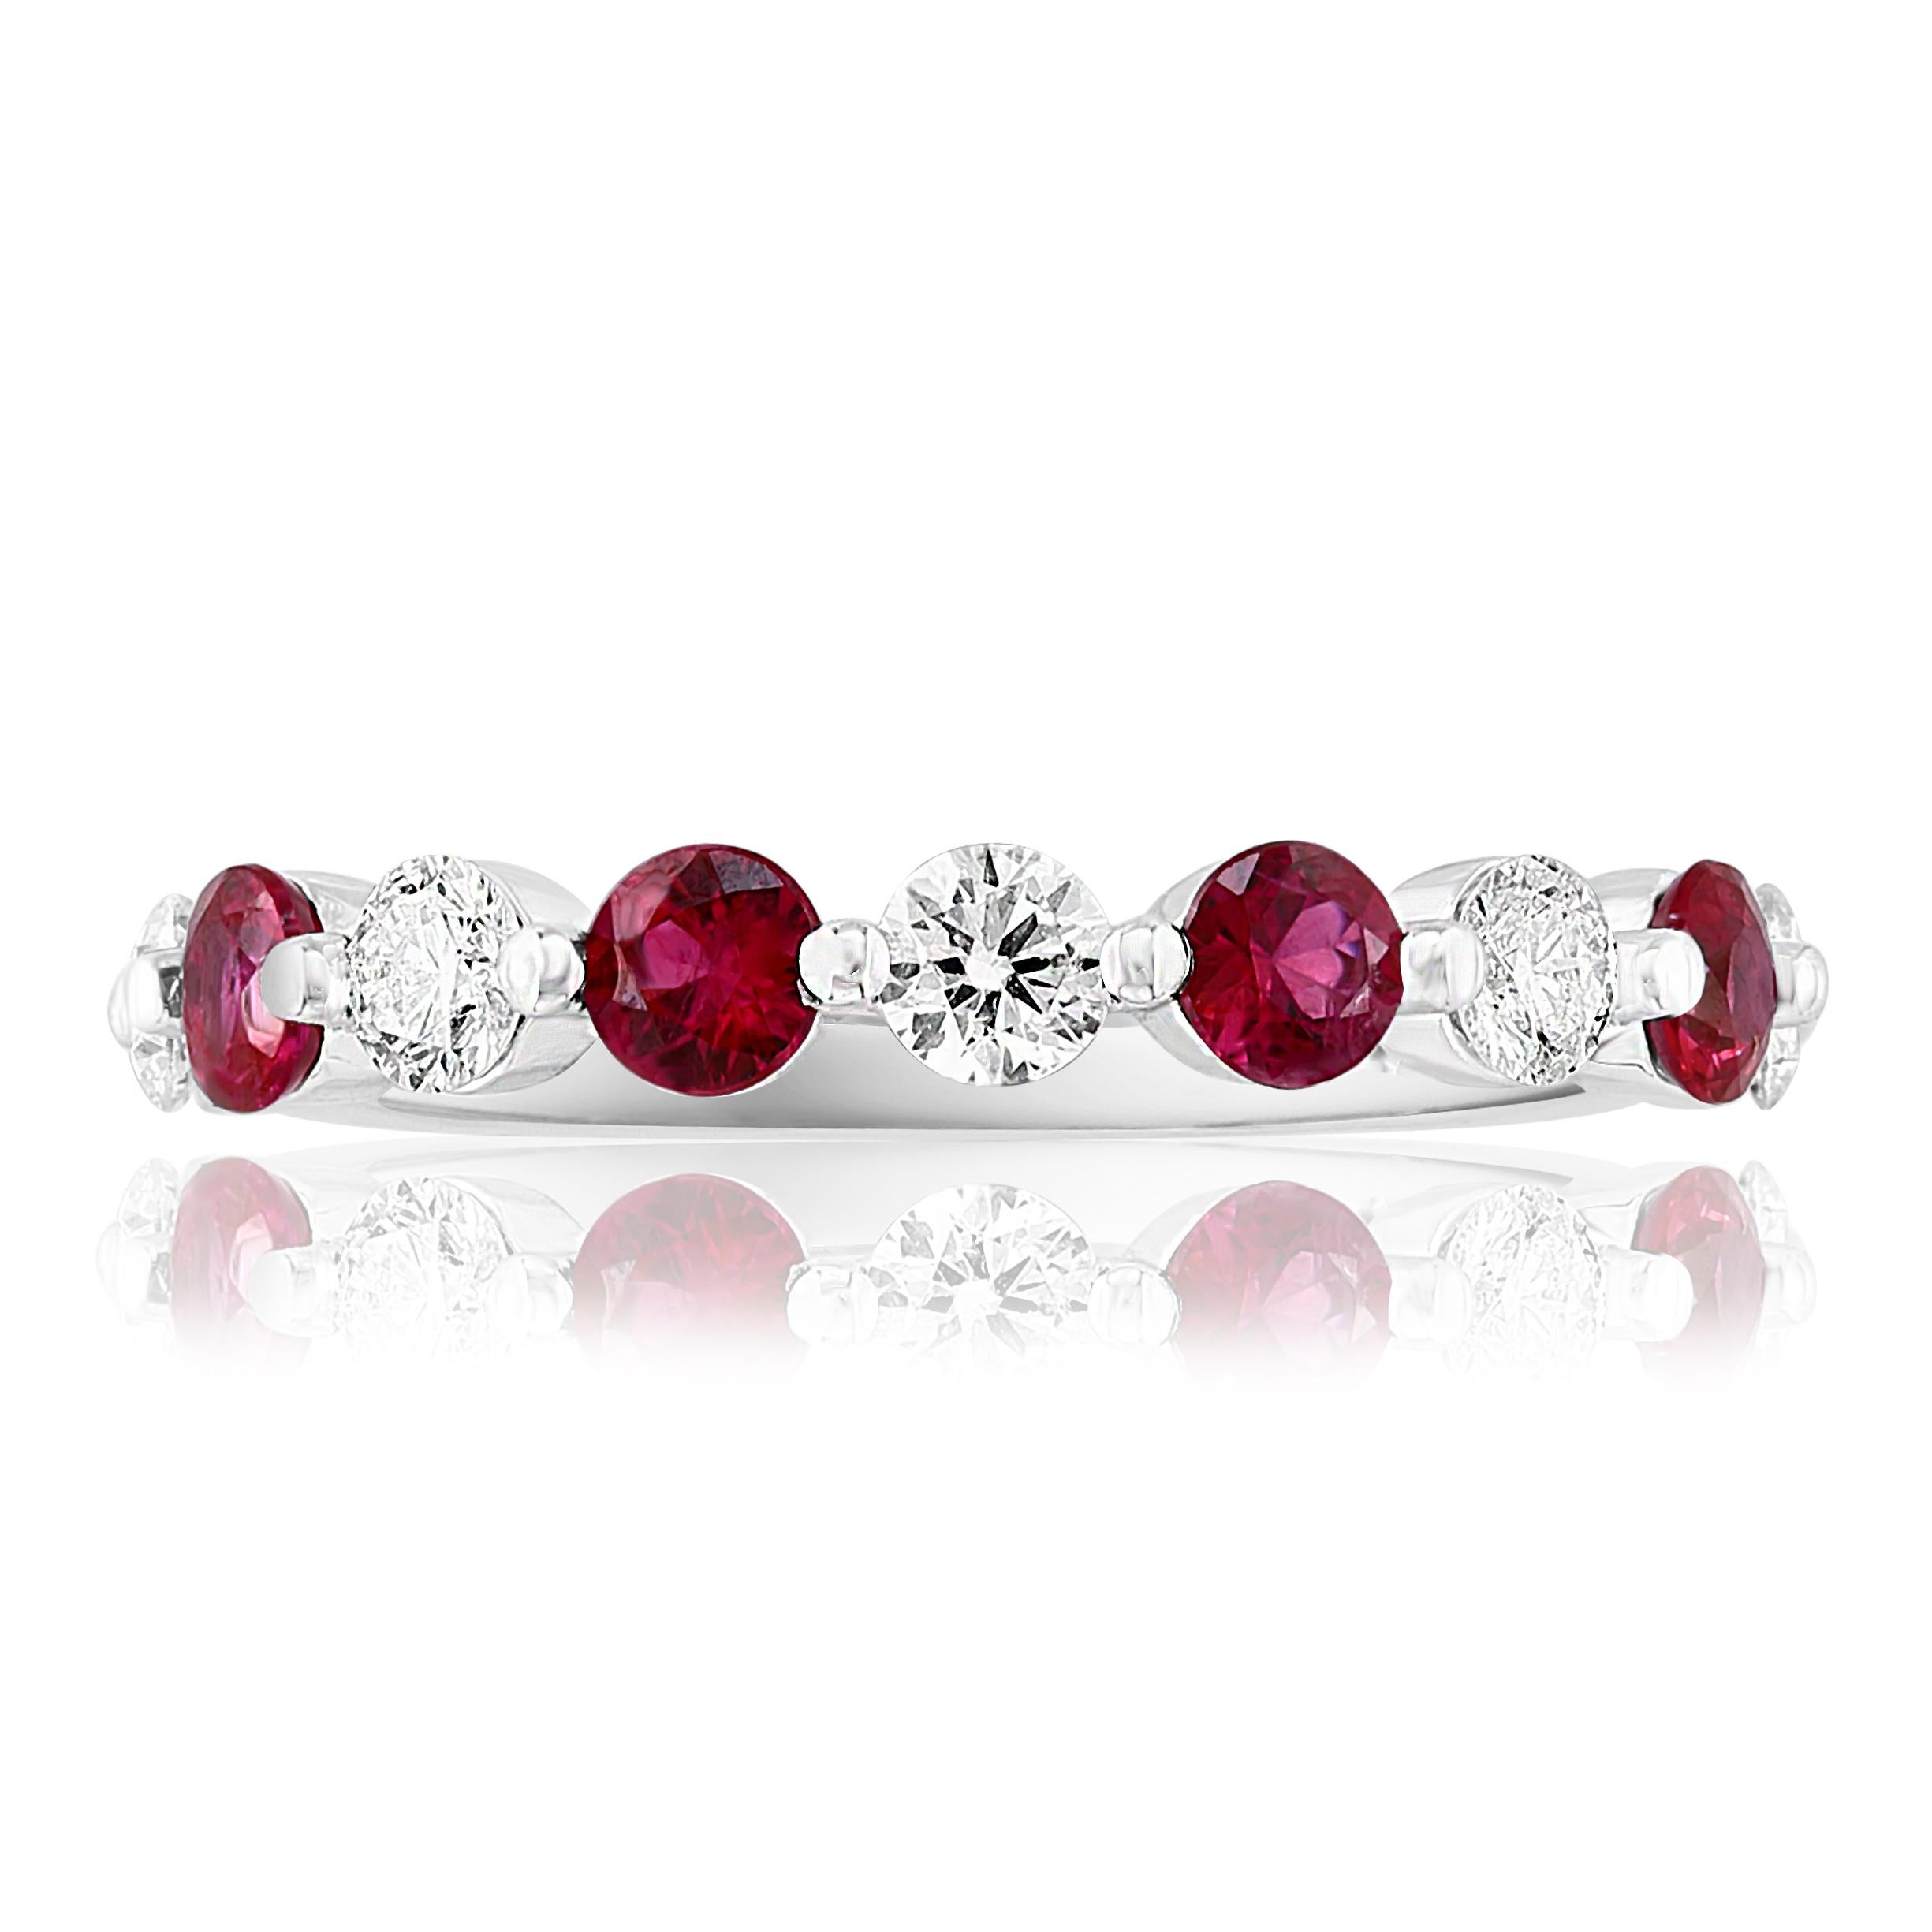 A fashionable and classic wedding band showcasing 5 brilliant cut diamonds weighing 0.50 carats total alternating with 4 round rubies weighing 0.62 carats. Stones secured with a shared prong setting made with 14K white gold. A versatile piece that